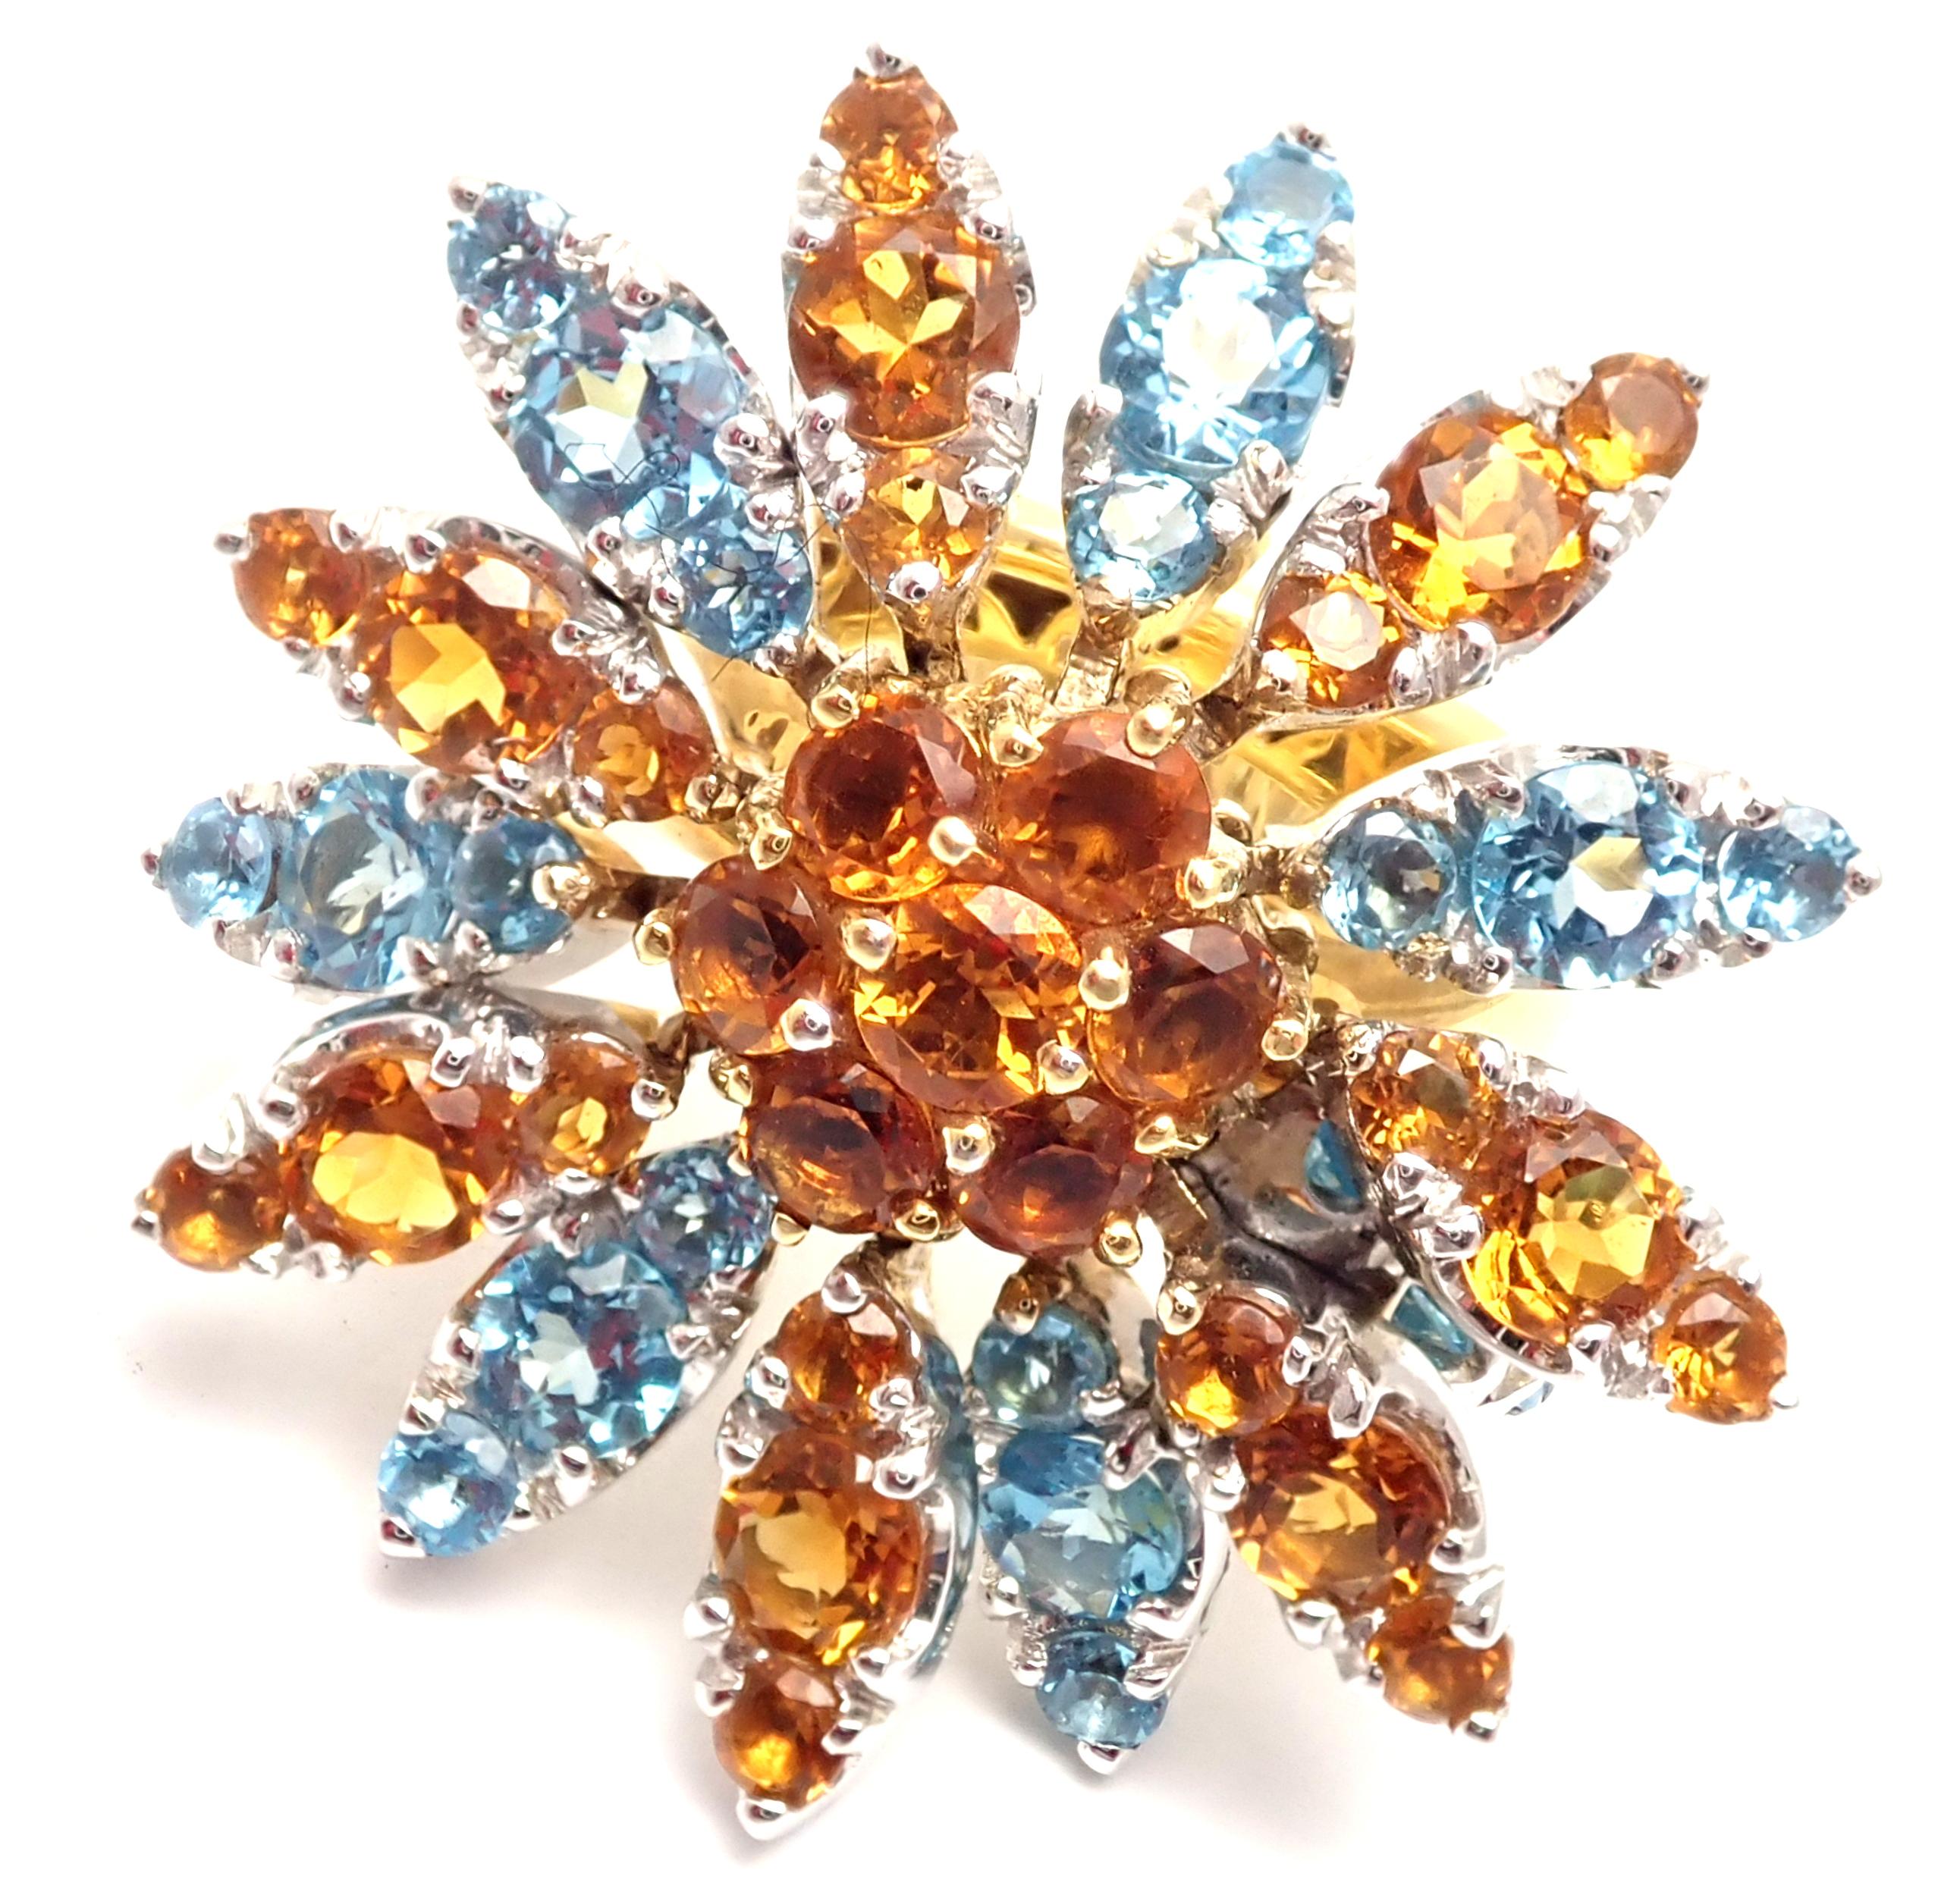 18k Yellow Gold Blue Topaz And Citrine MARGHERITA Ring by Pasquale Bruni.
With Blue Topaz & Citrine stones
This ring comes with Box and Certificate
Size: 6.5
Weight: 25.7 grams
Width: 1.3